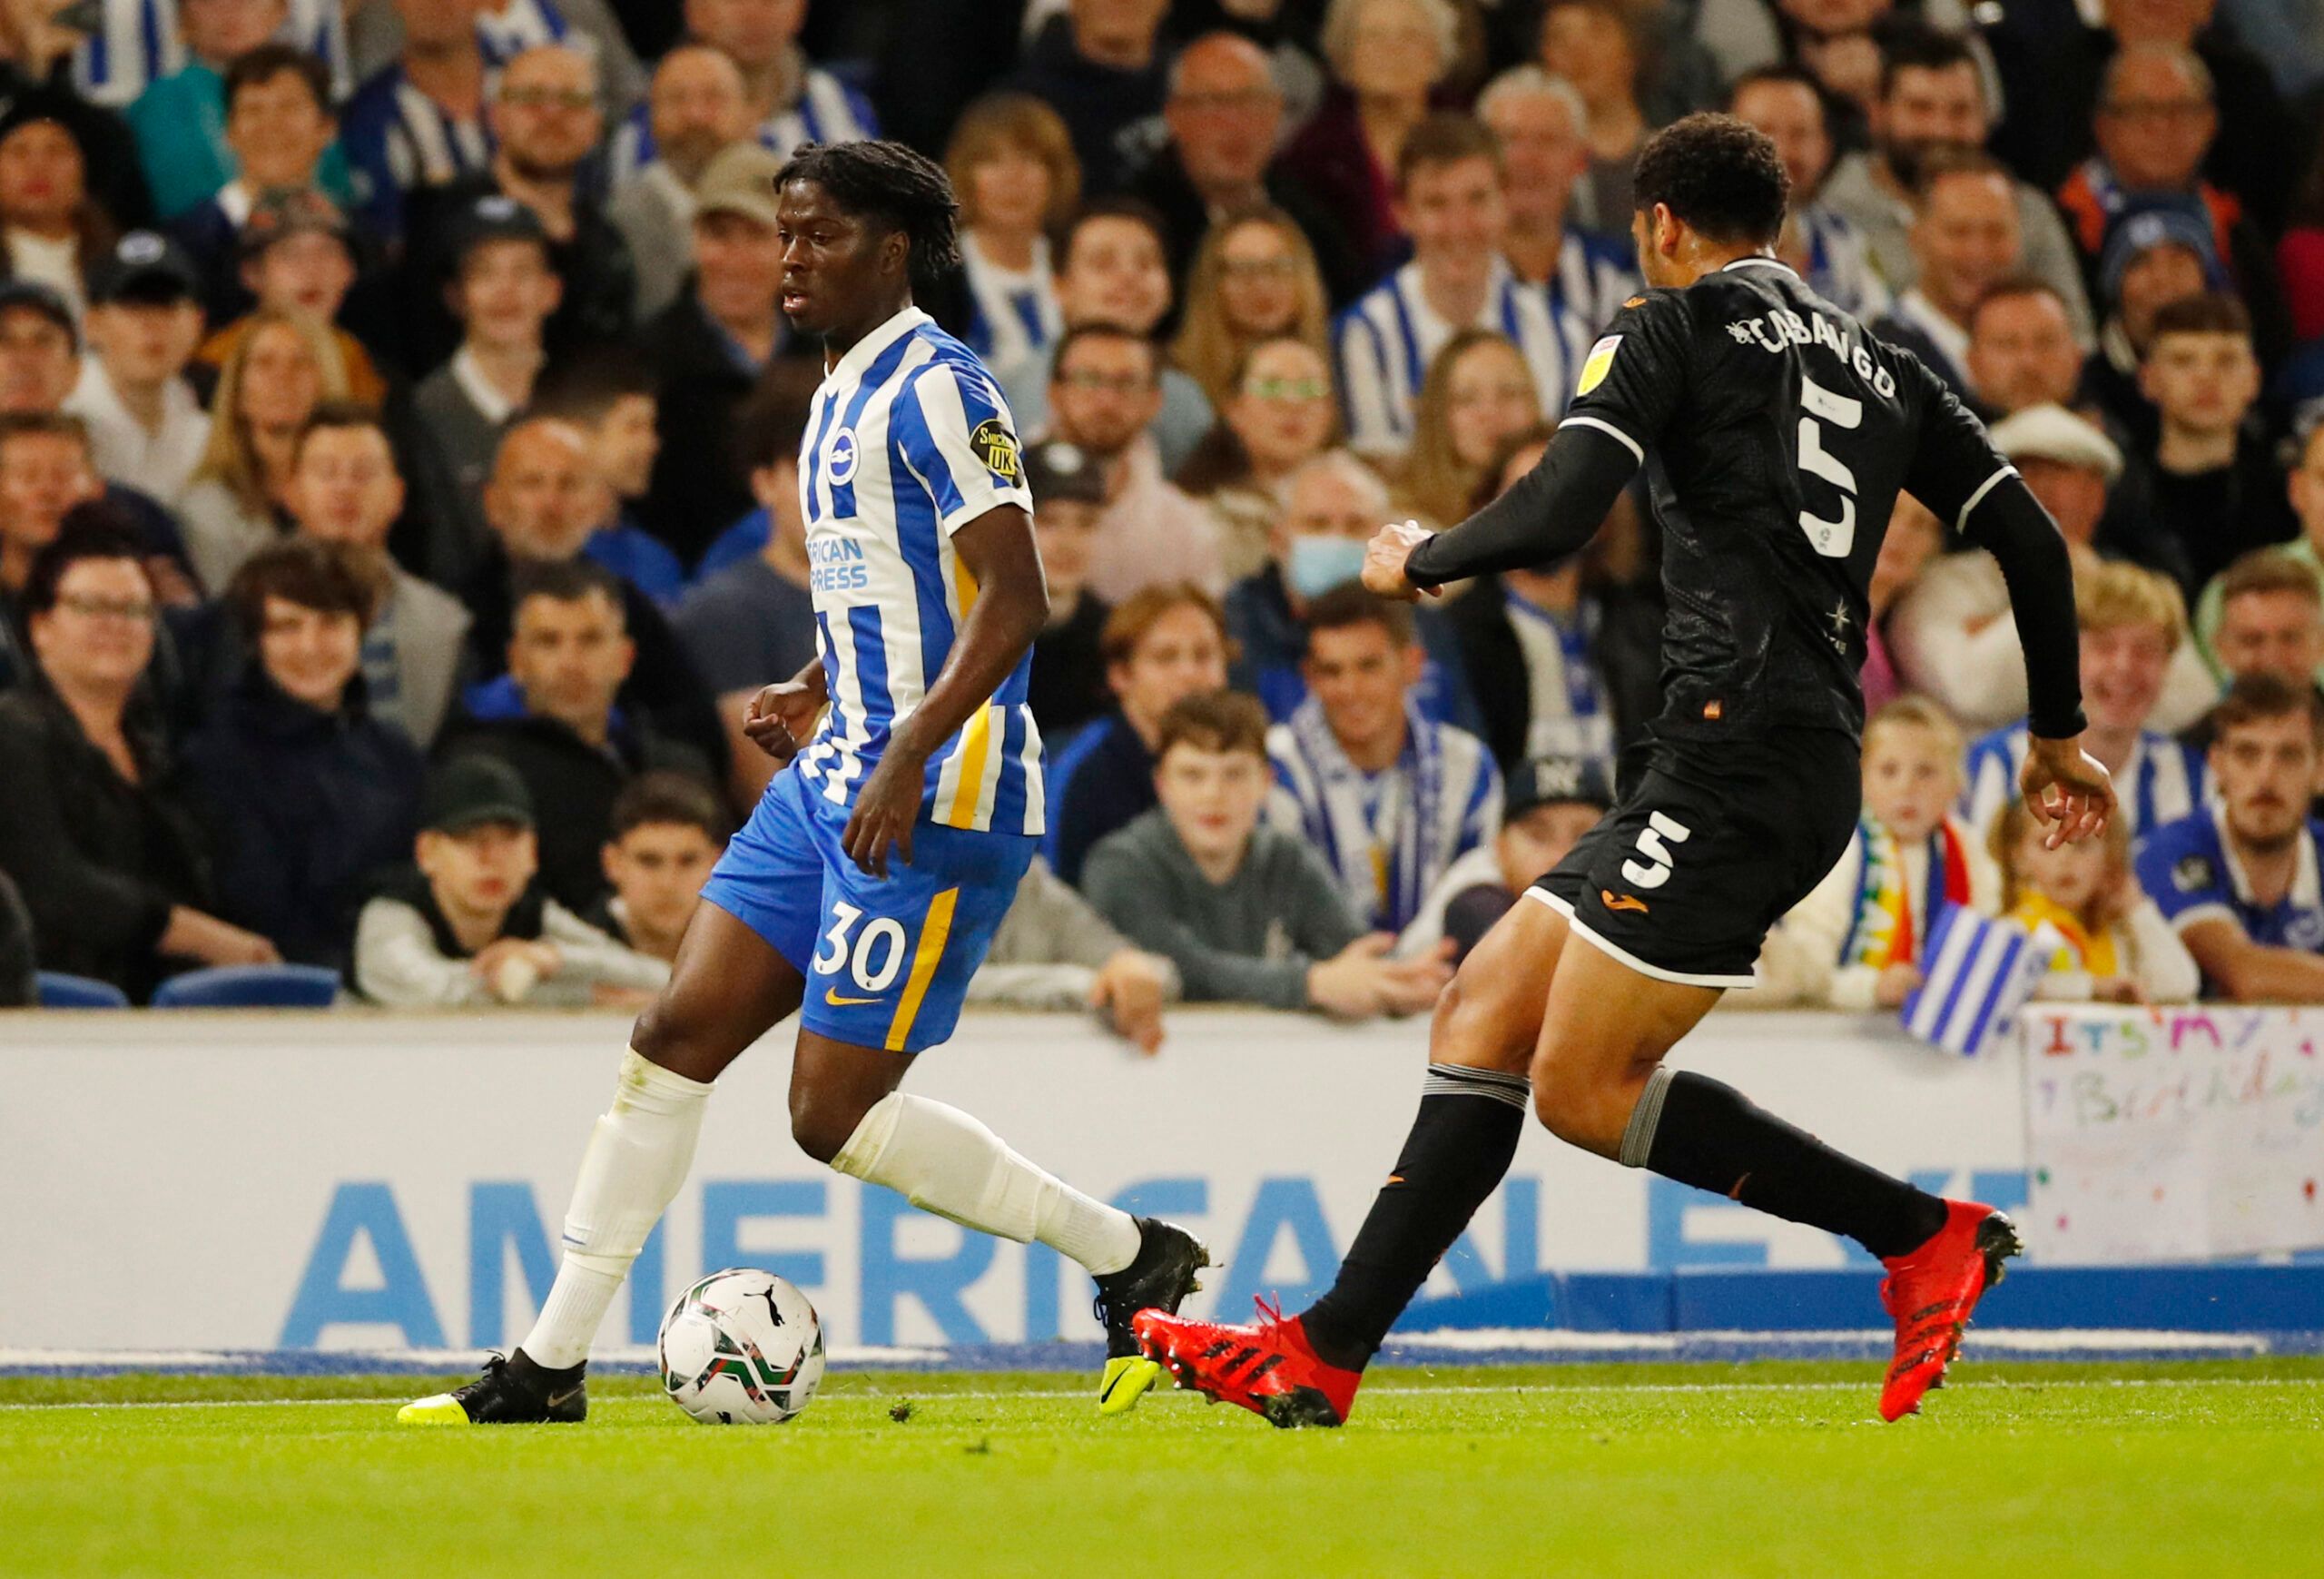 Soccer Football - Carabao Cup - Third Round - Brighton &amp; Hove Albion v Swansea City - The American Express Community Stadium, Brighton, Britain - September 22, 2021 Brighton &amp; Hove Albion's Taylor Richards in action with Swansea City's Ben Cabango Action Images via Reuters/Andrew Boyers EDITORIAL USE ONLY. No use with unauthorized audio, video, data, fixture lists, club/league logos or 'live' services. Online in-match use limited to 75 images, no video emulation. No use in betting, games